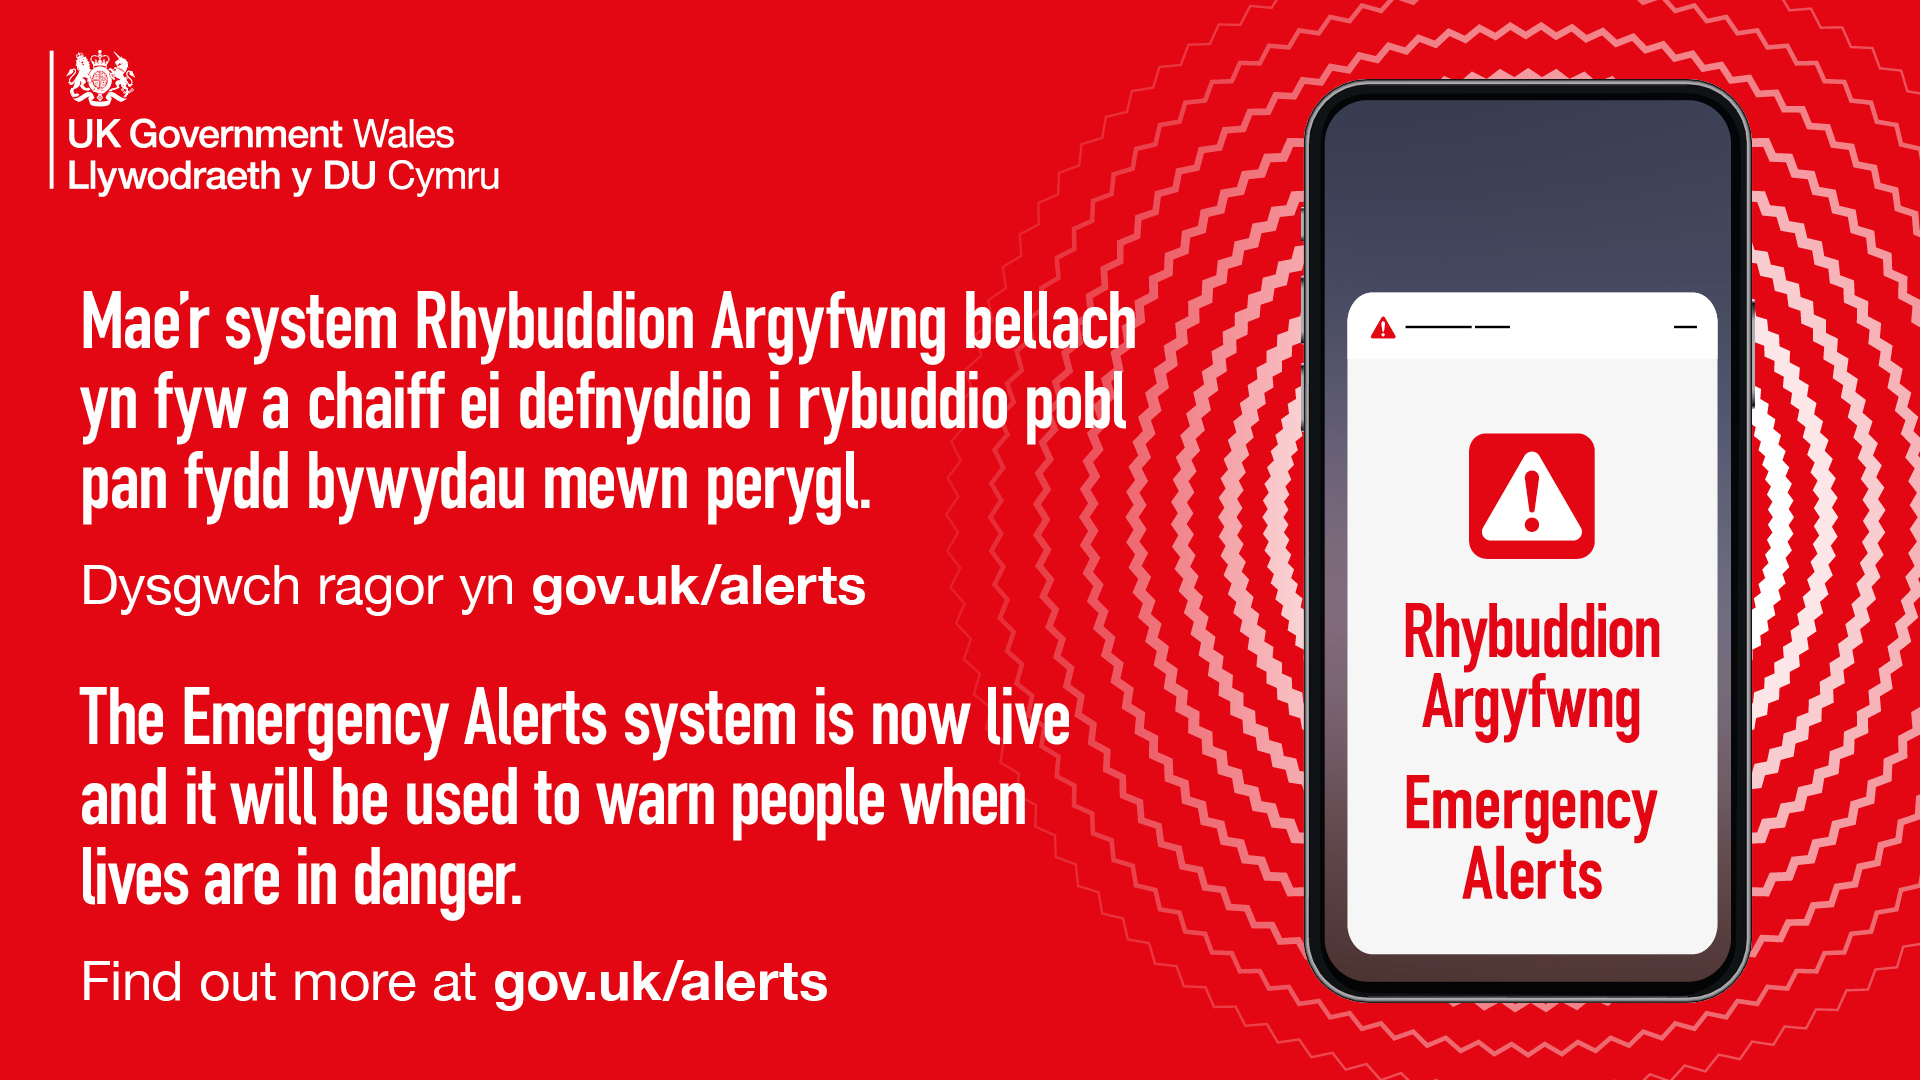 ​UK Government to Test New Emergency Alert System on 23rd April